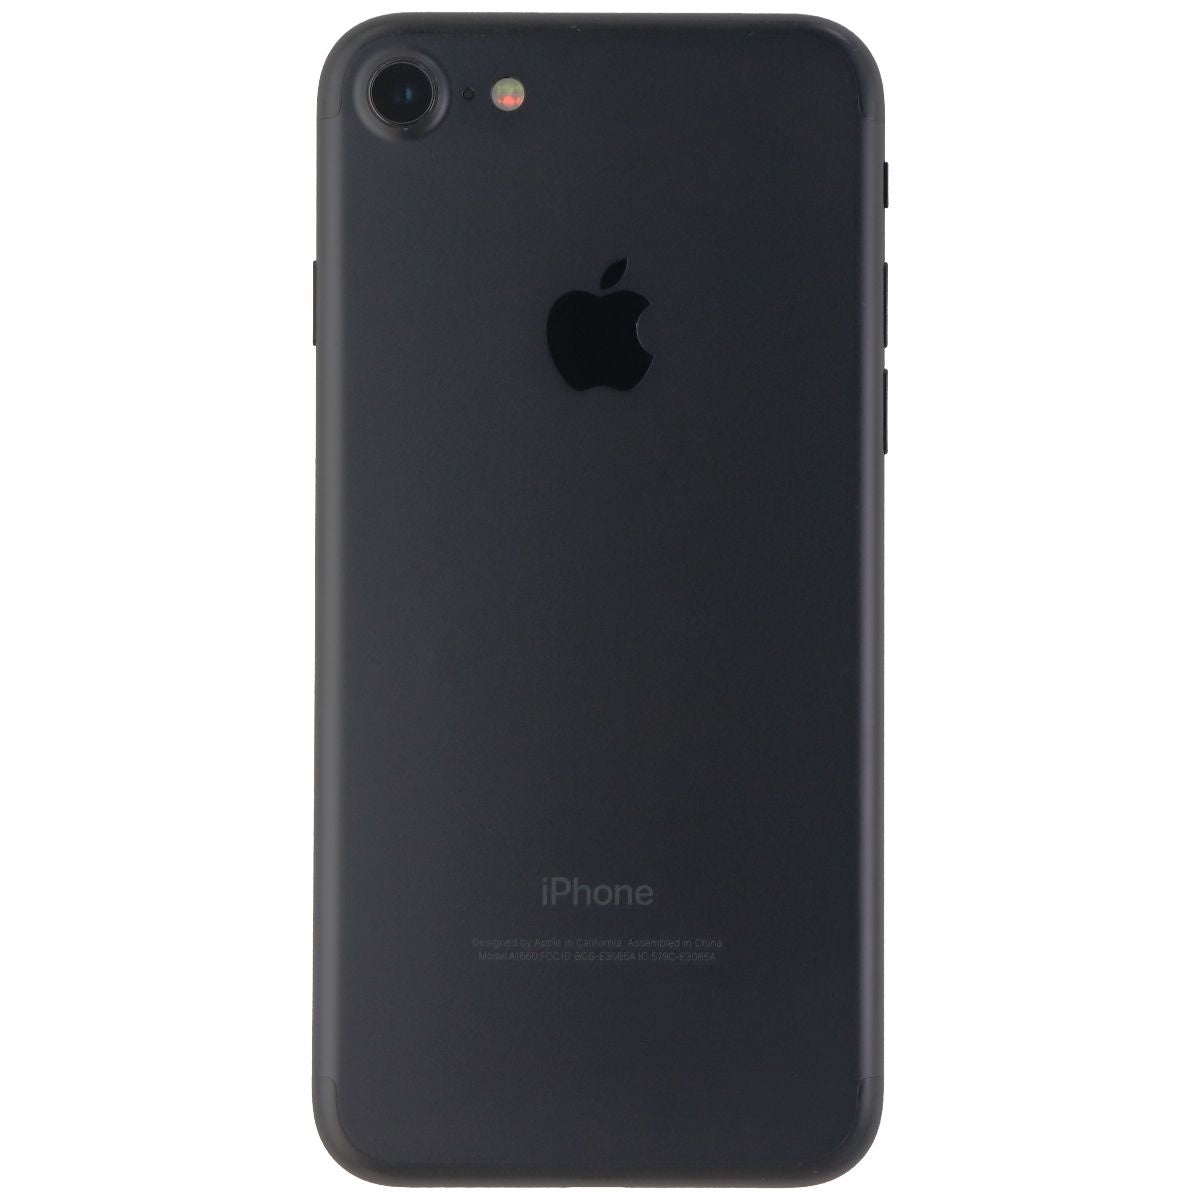 Apple iPhone 7 (4.7-inch) Smartphone (A1660) Unlocked - 32GB / Black Cell Phones & Smartphones Apple    - Simple Cell Bulk Wholesale Pricing - USA Seller